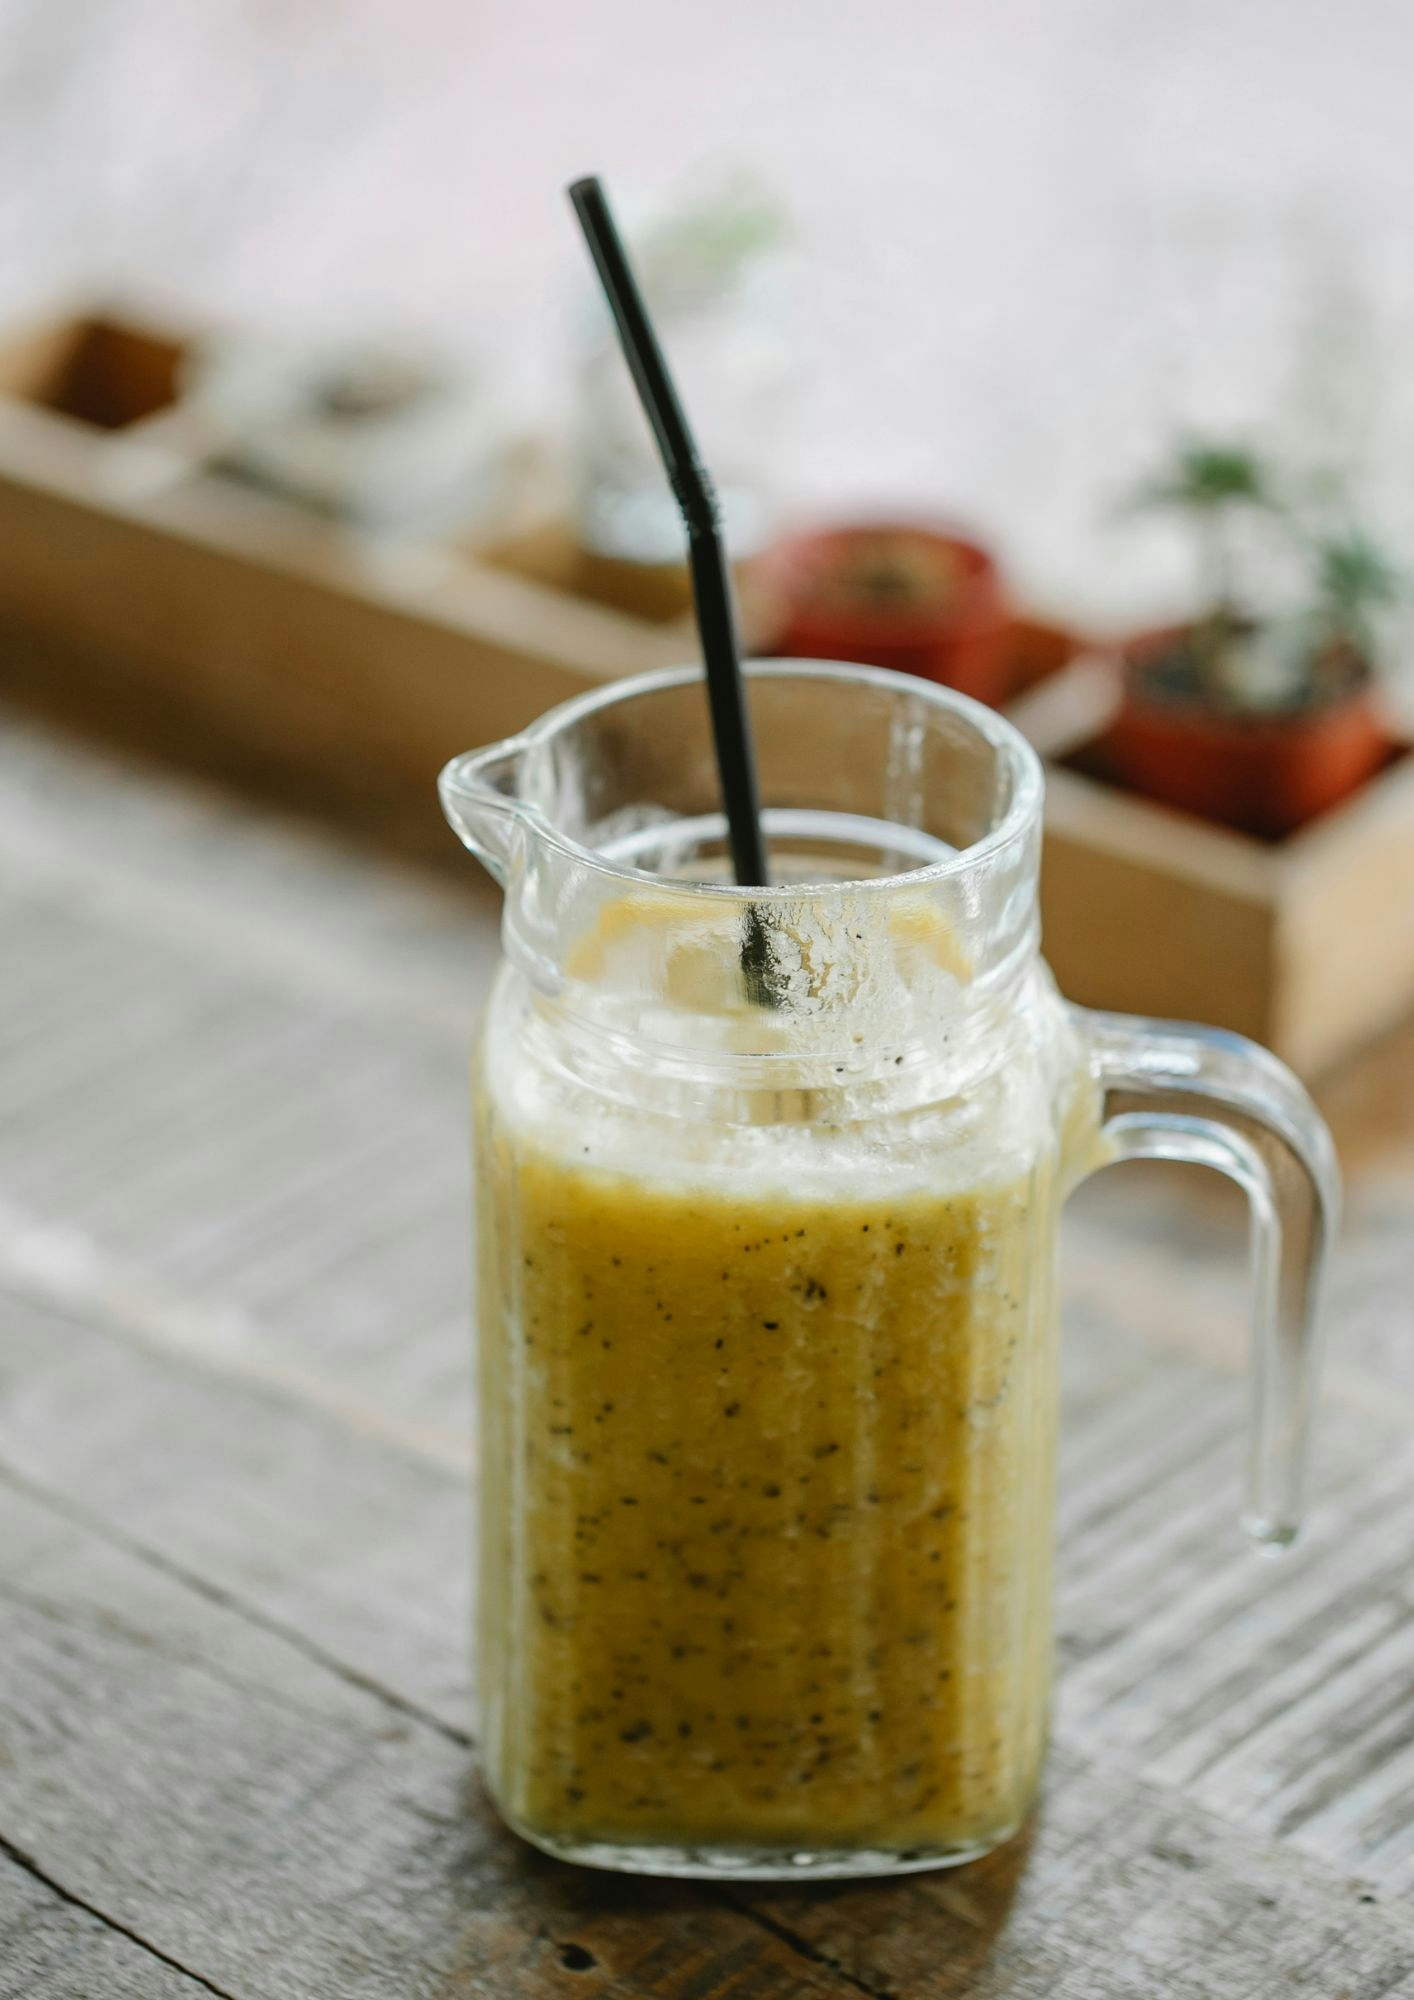 Banana, Chia Seeds & Almond Butter Pre-Workout Smoothie